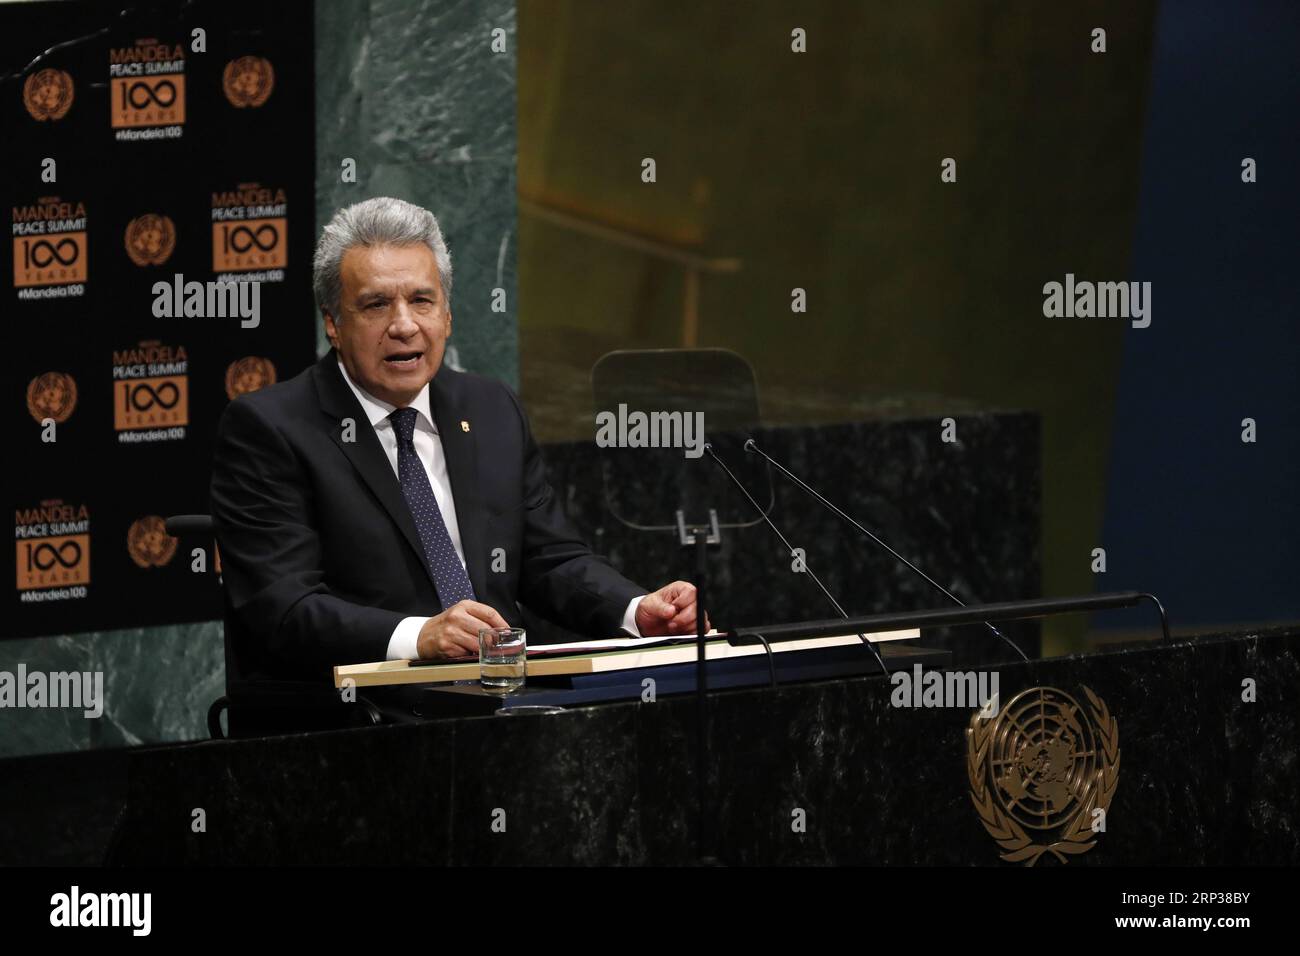 (180924) -- UNITED NATIONS, Sept. 24, 2018 -- Ecuadorian President Lenin Moreno addresses the Nelson Mandela Peace Summit held during the ongoing UN General Assembly s annual top-level meeting at the UN headquarters in New York, on Sept. 24, 2018. UN Secretary-General Antonio Guterres said Monday that Nelson Mandela embodied the highest values of the world body, in remembrance of the late South African leader who was a hallmark in the fight against apartheid. ) UN-GENERAL ASSEMBLY-NELSON MANDELA PEACE SUMMIT LixMuzi PUBLICATIONxNOTxINxCHN Stock Photo